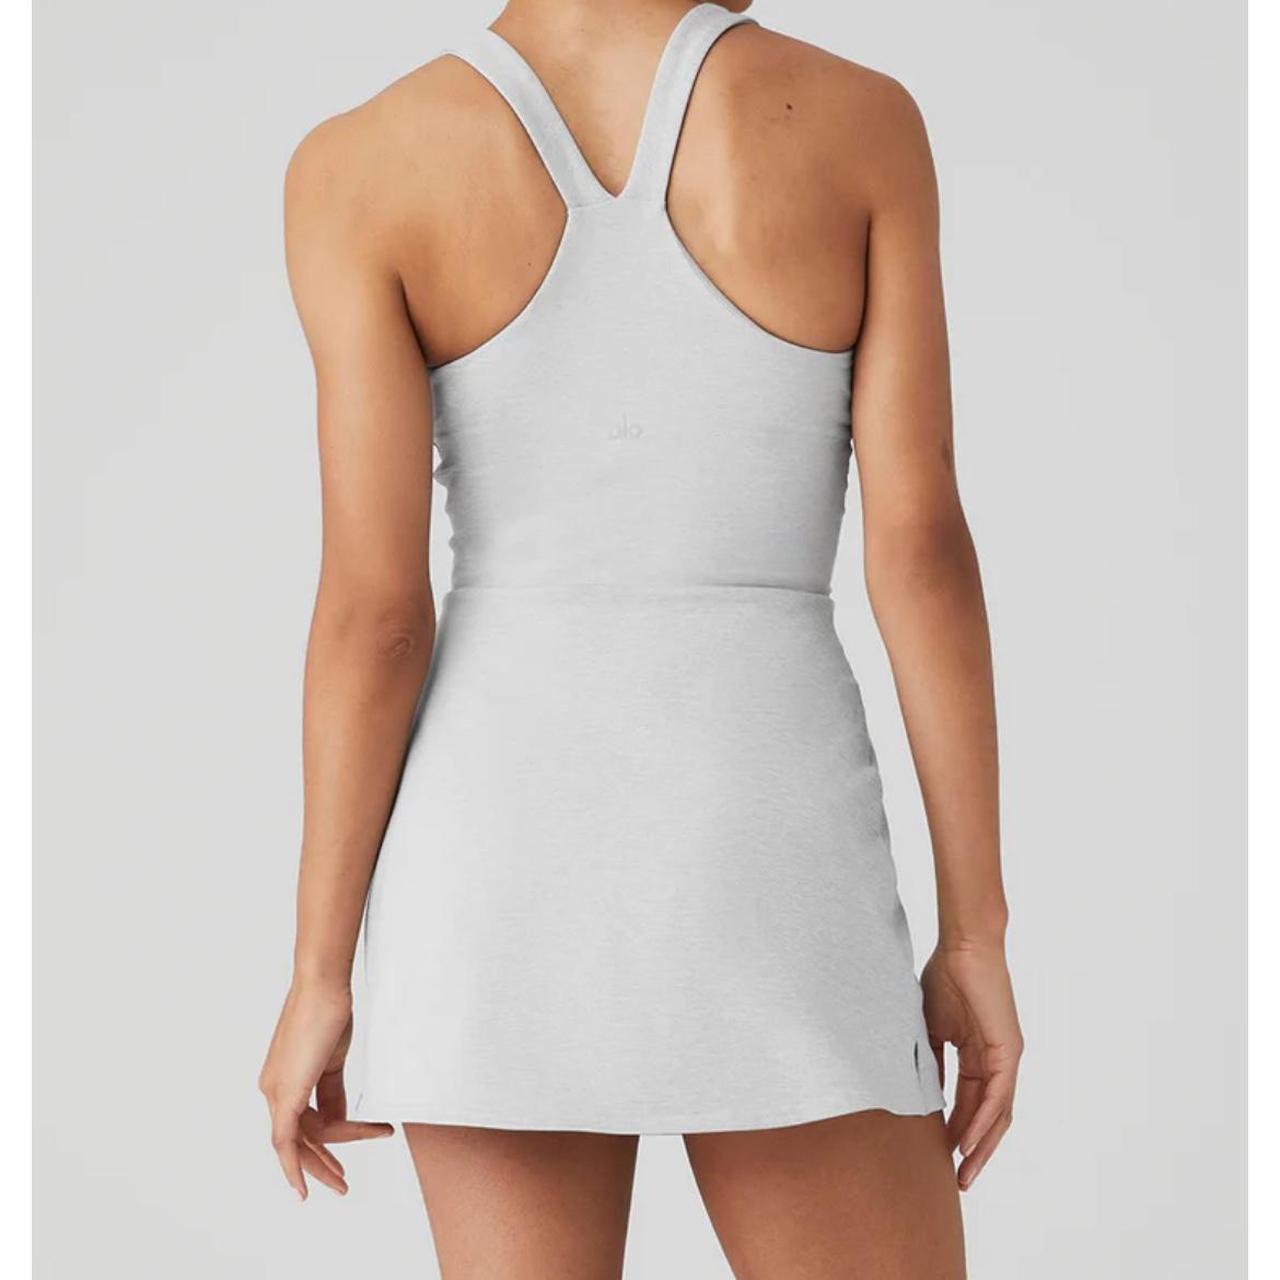 Airbrush Real Dress - Athletic Heather Grey